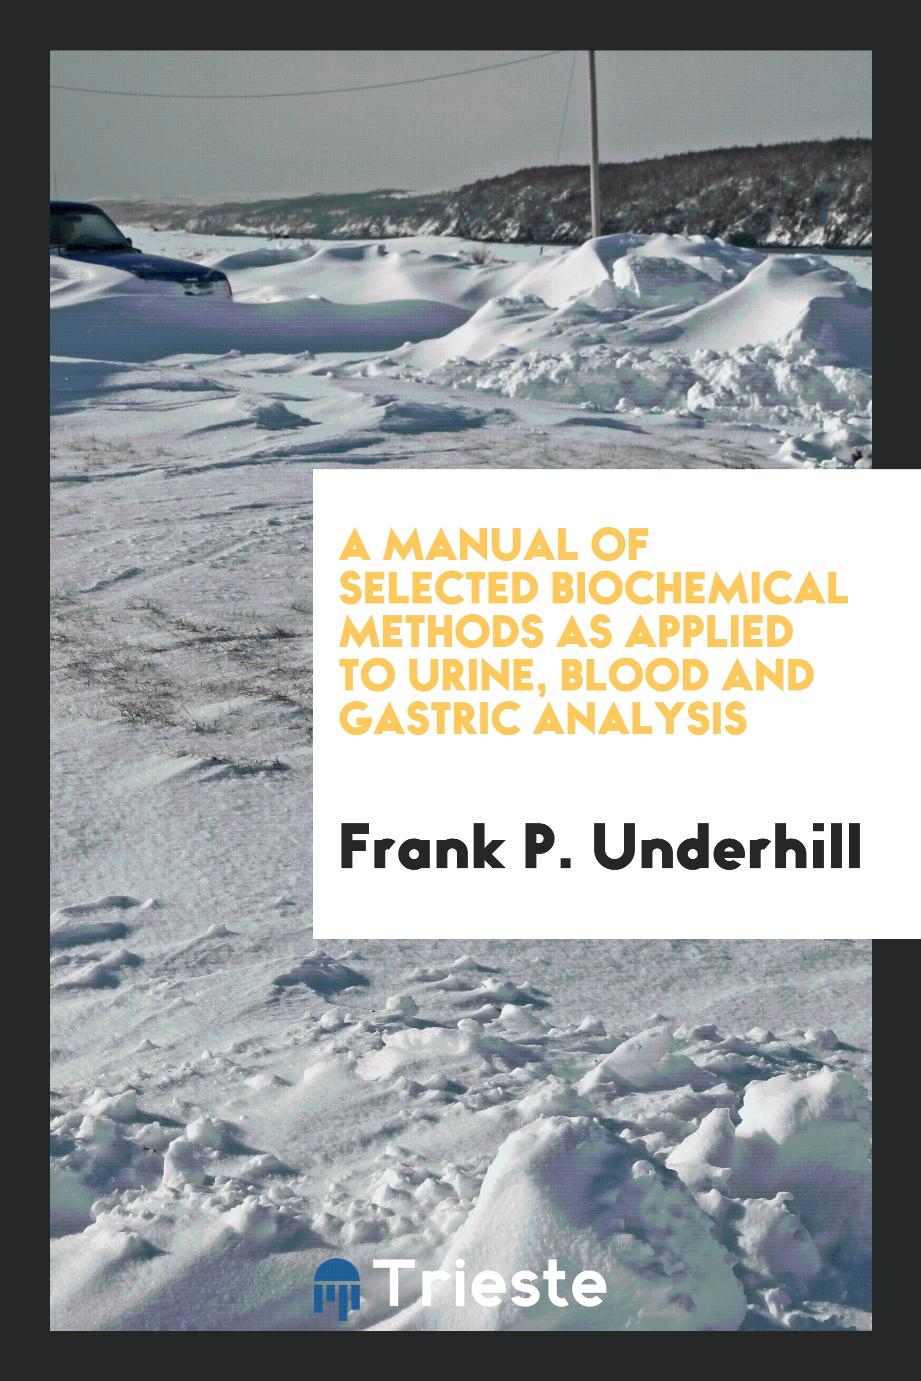 A manual of selected biochemical methods as applied to urine, blood and gastric analysis